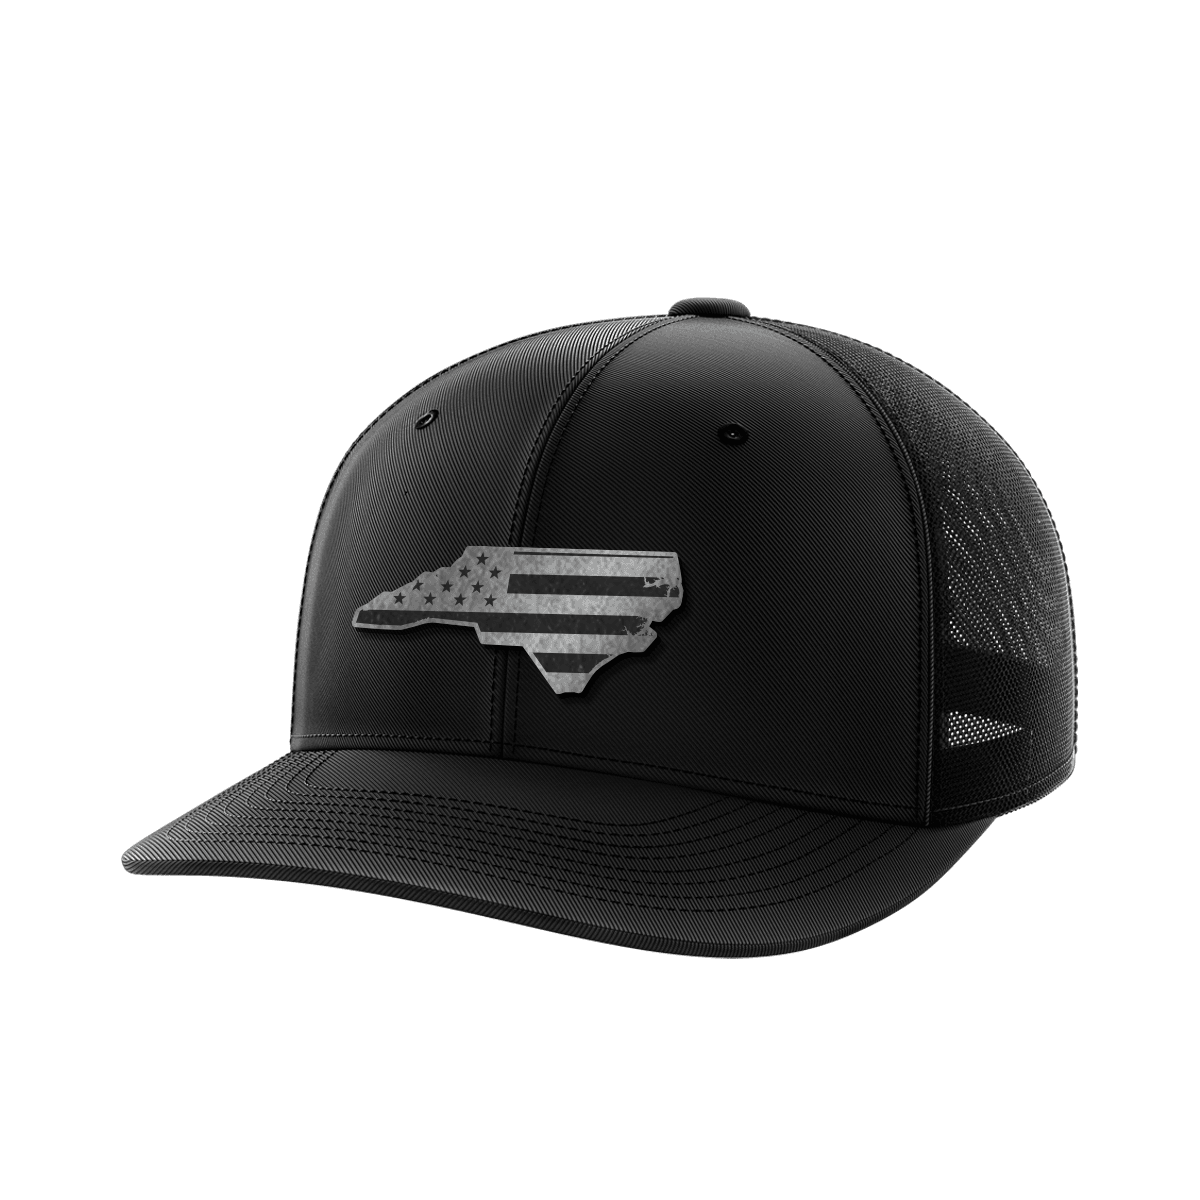 North Carolina United Collection (black leather) - Greater Half